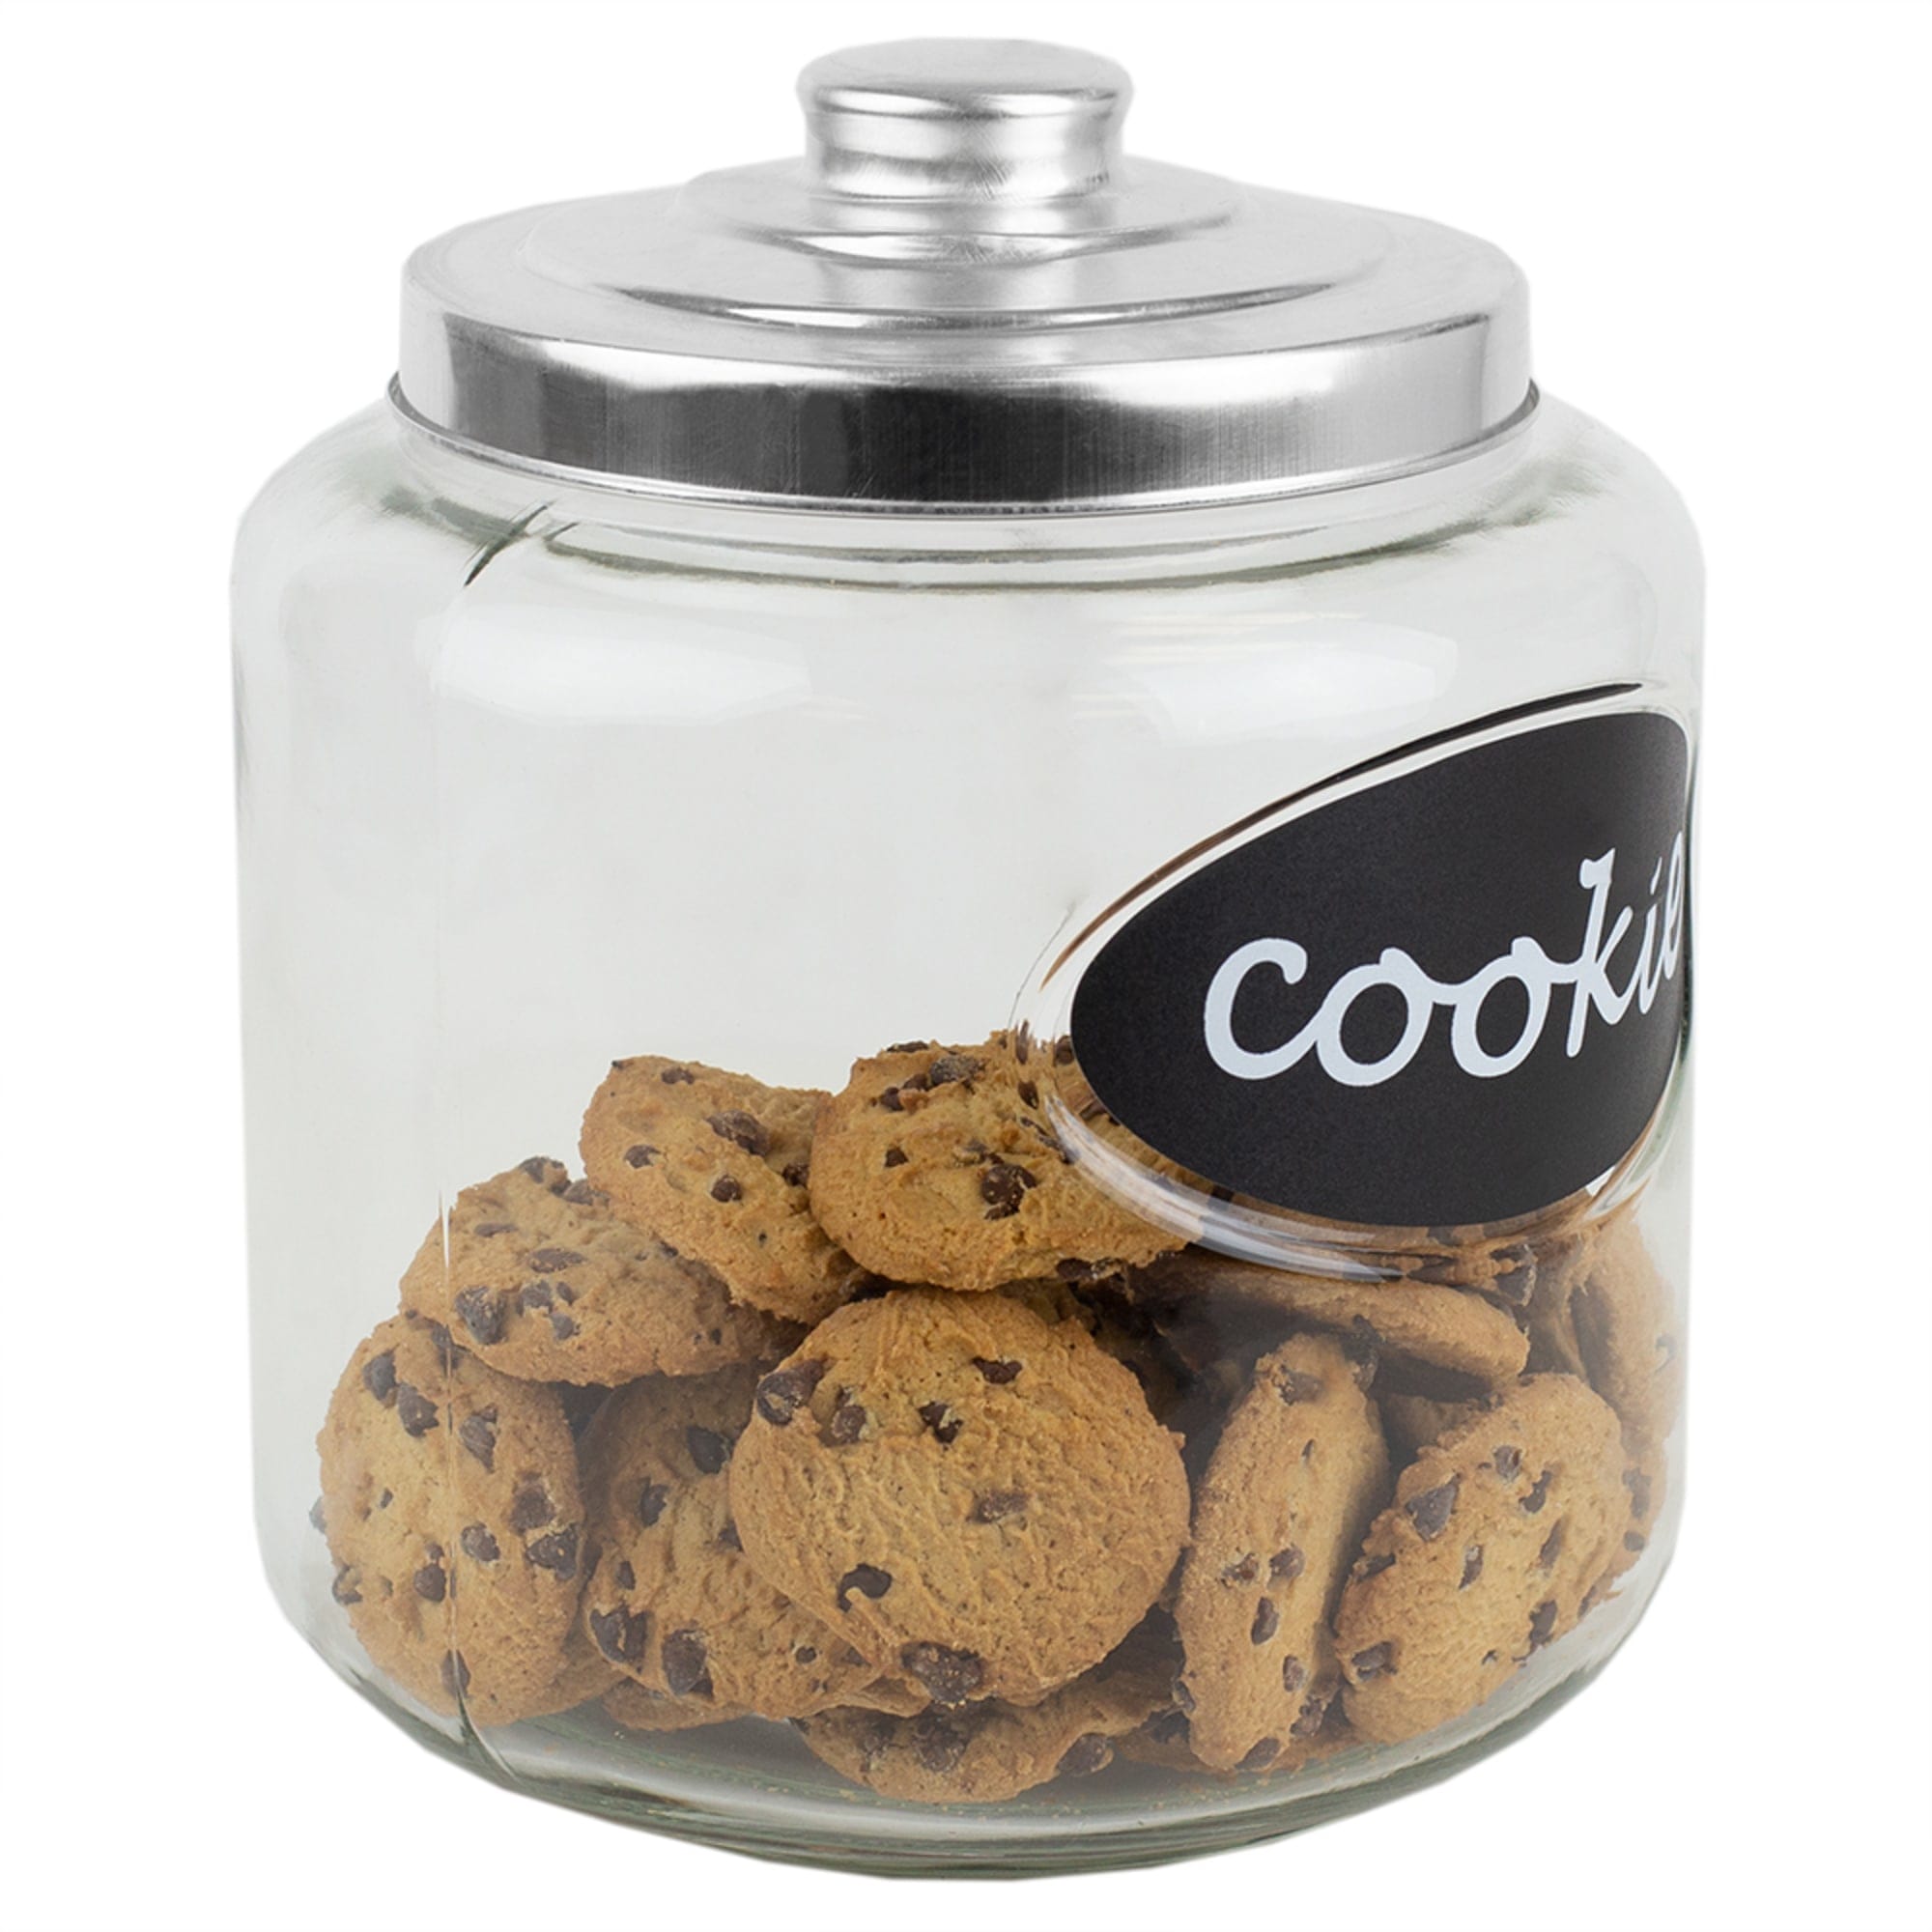 Home Basics Large Glass Cookie Jar with Metal Top $8.00 EACH, CASE PACK OF 8